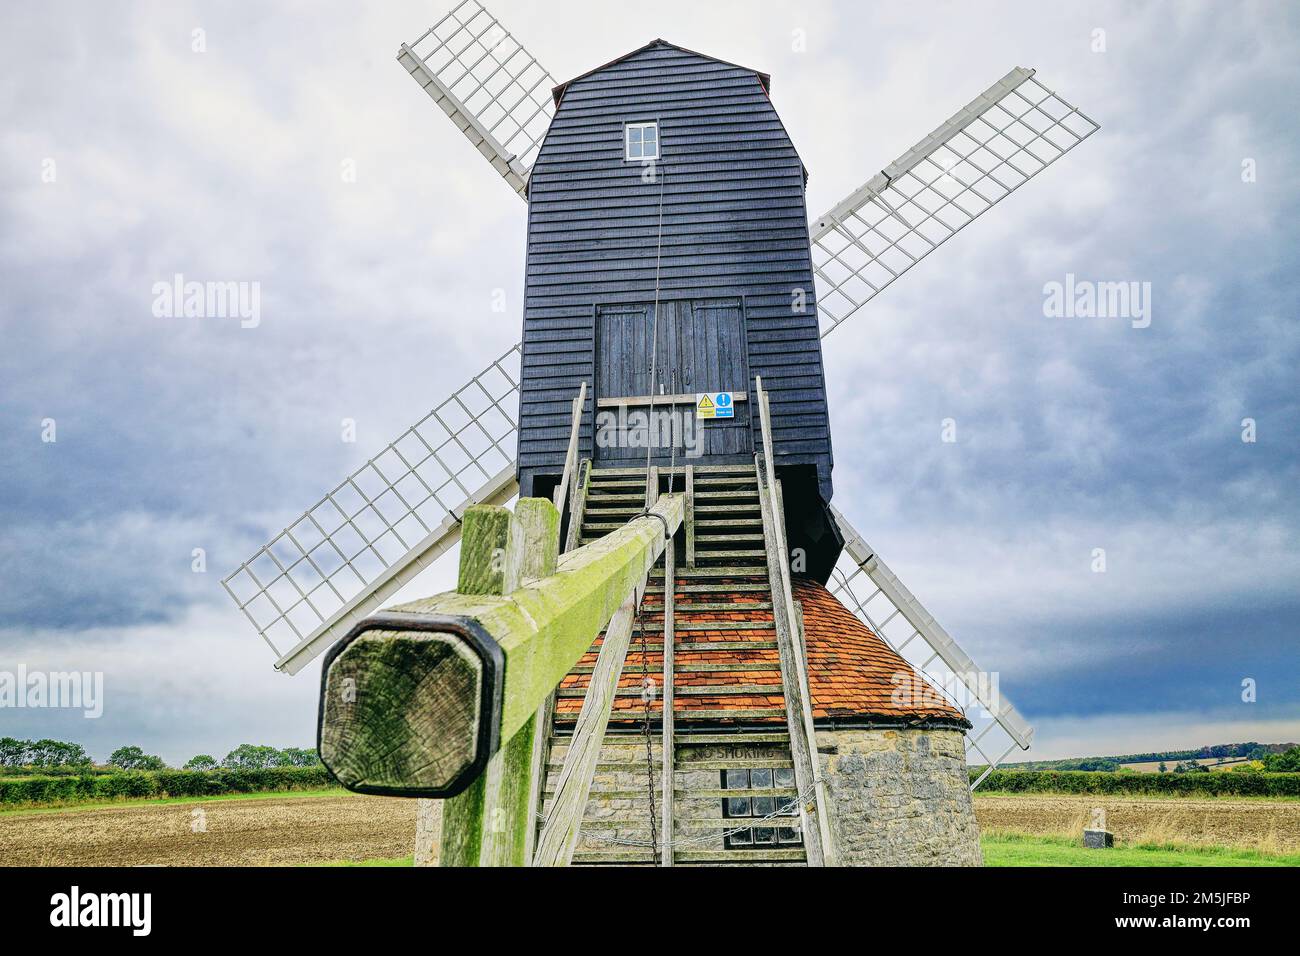 18th century windmill in a field on farmland in the village of Stevington, Bedfordshire, England, UK Stock Photo